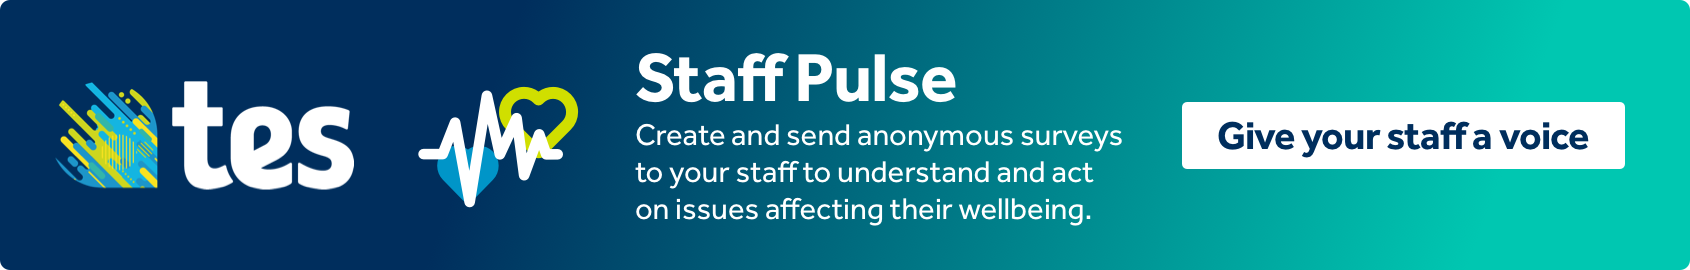 Give your staff a voice